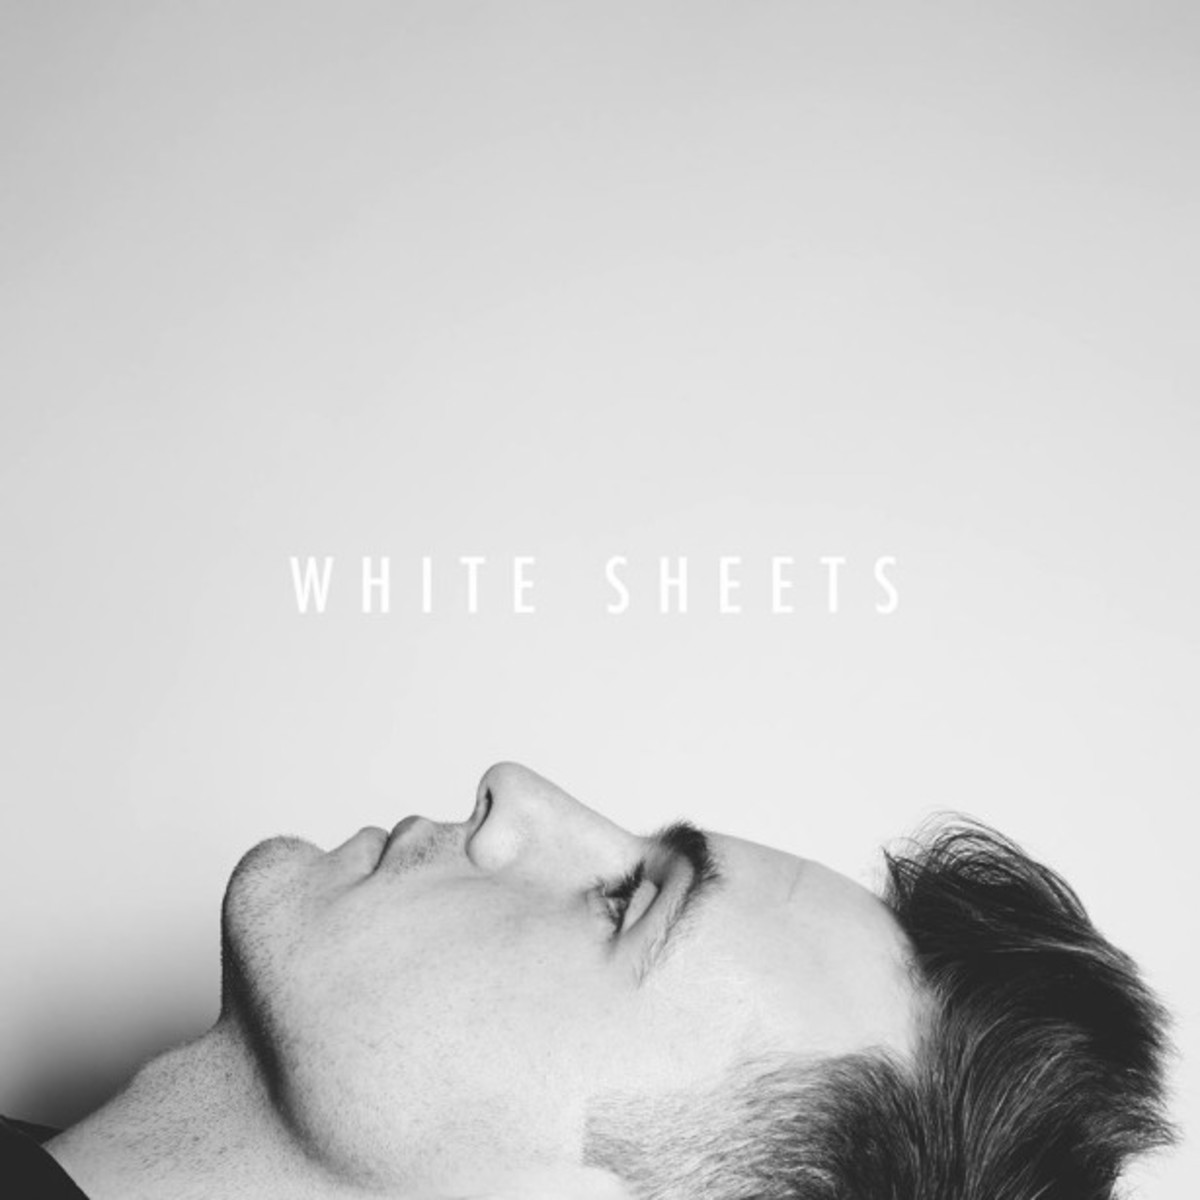 AU8UST Gives Trap A New Touch On 'White Sheets'